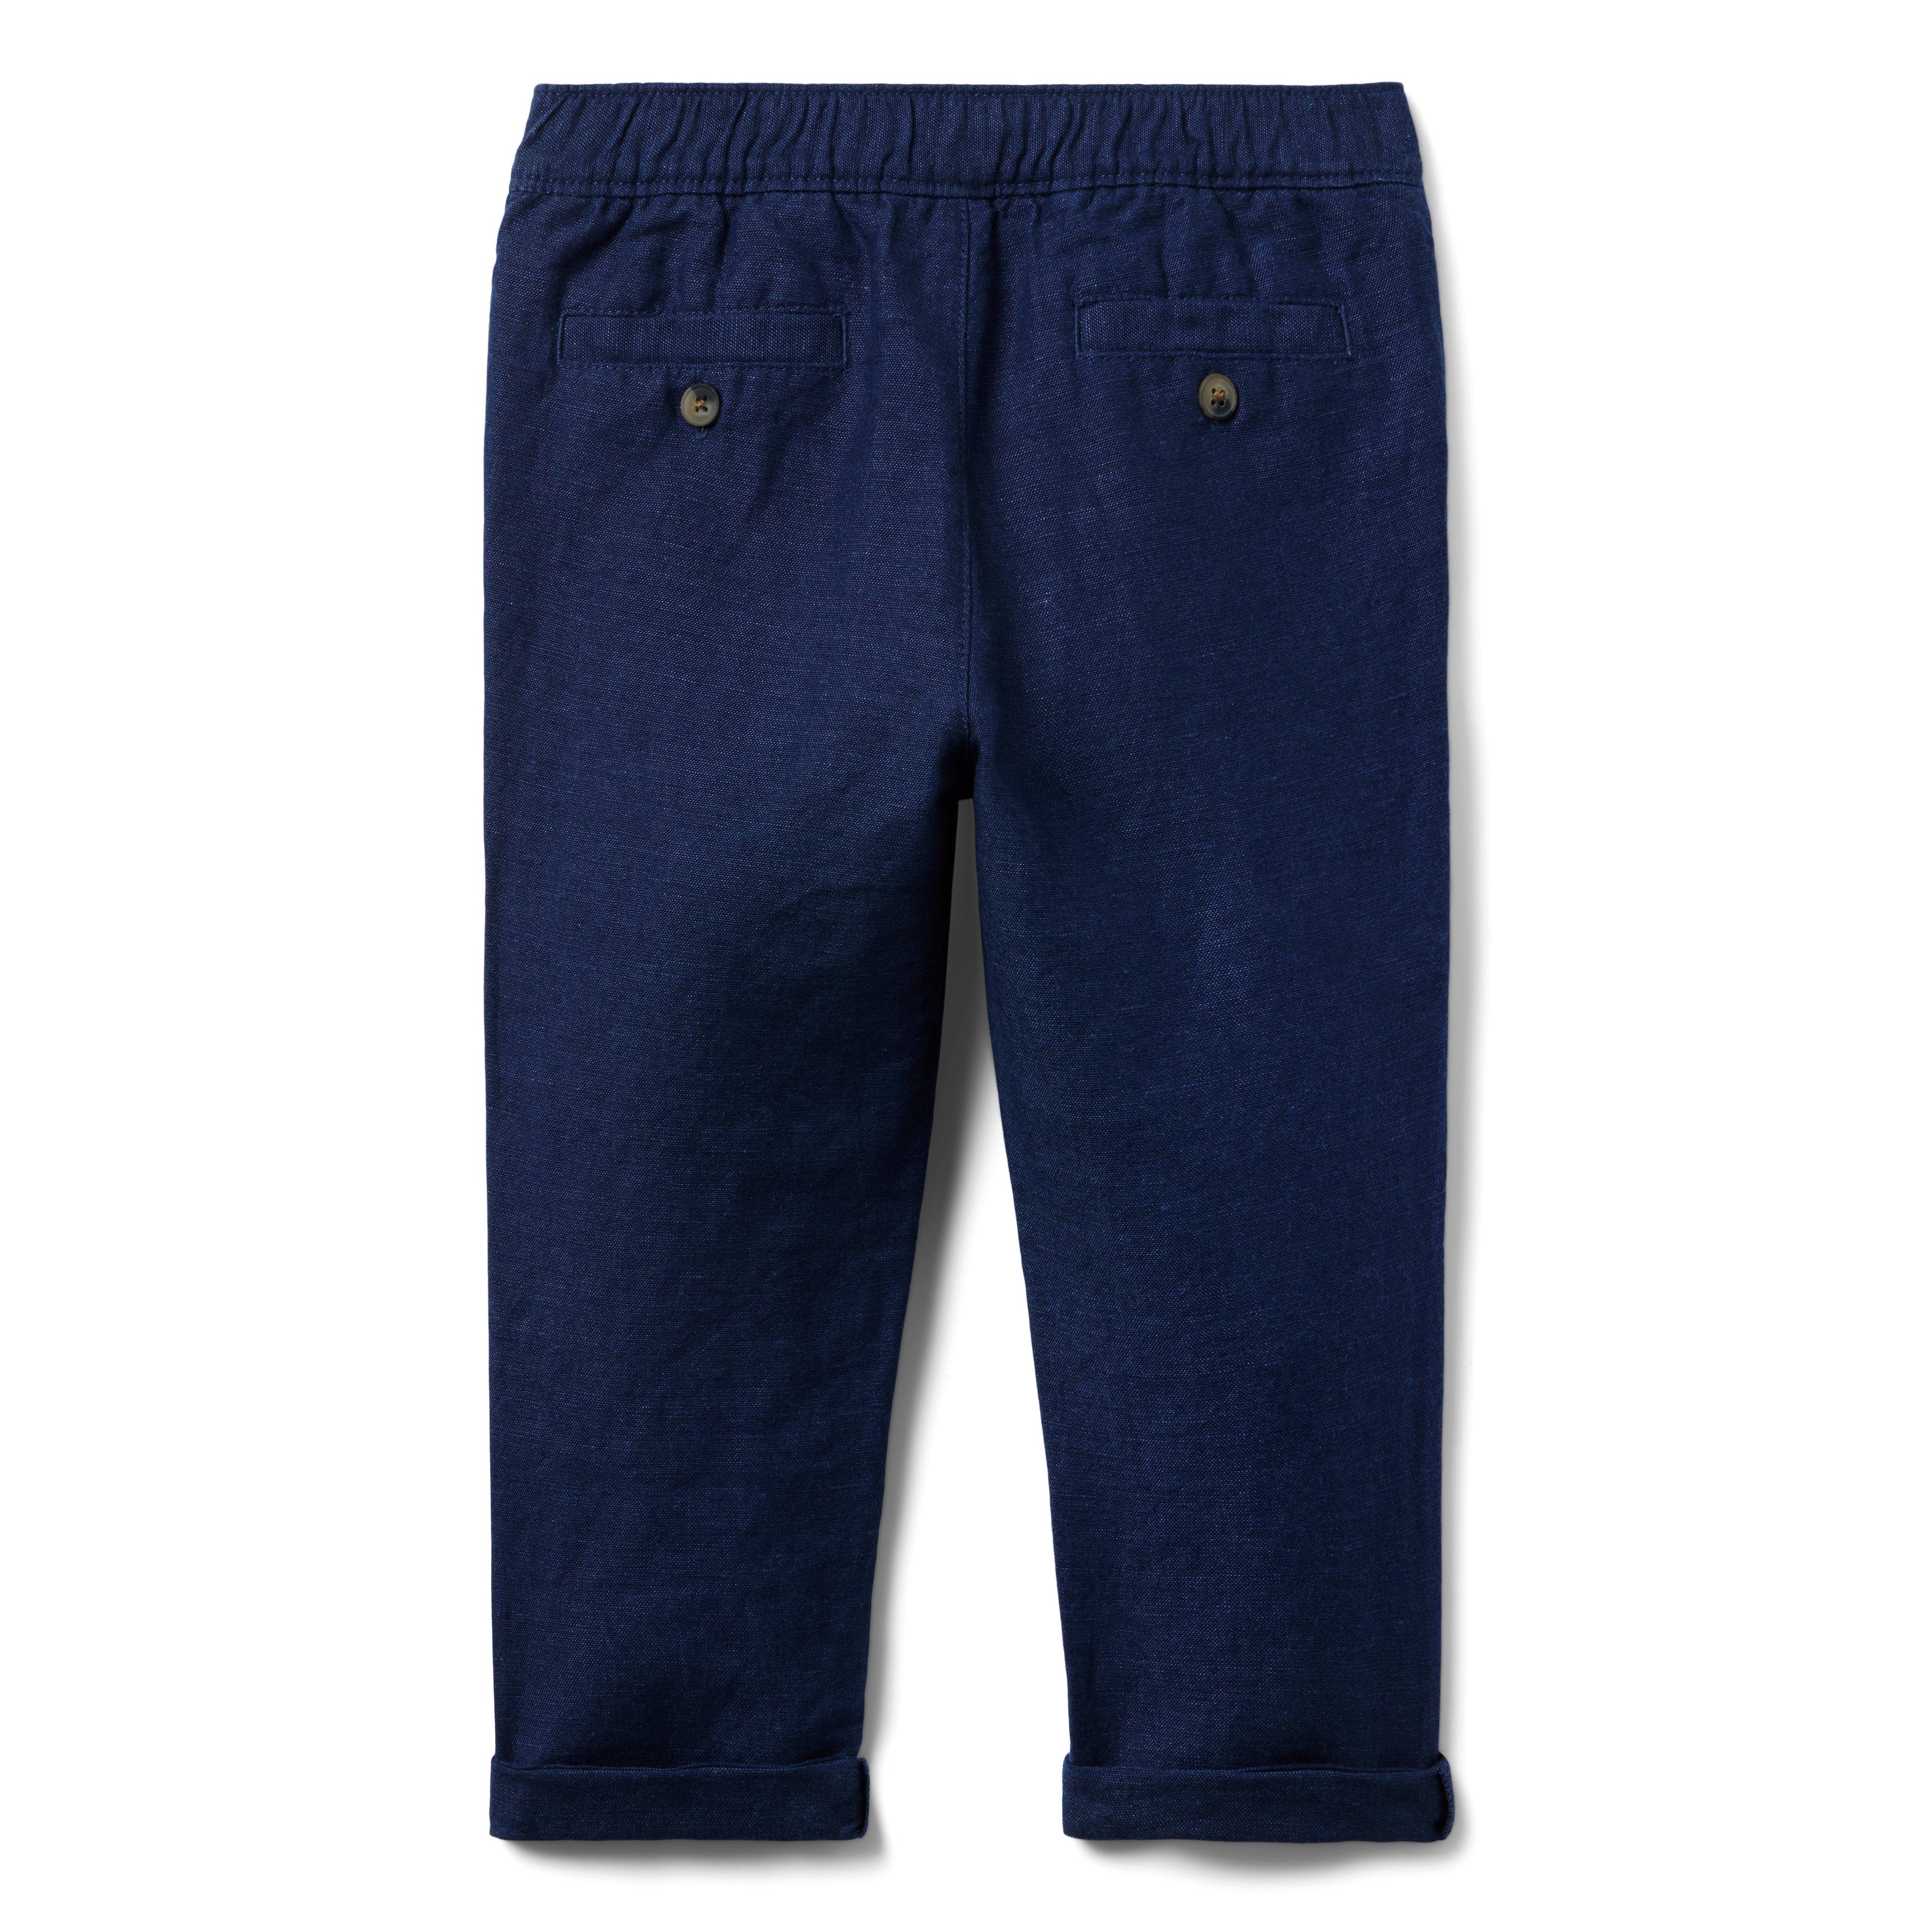 The Linen-Cotton Pull-On Pant